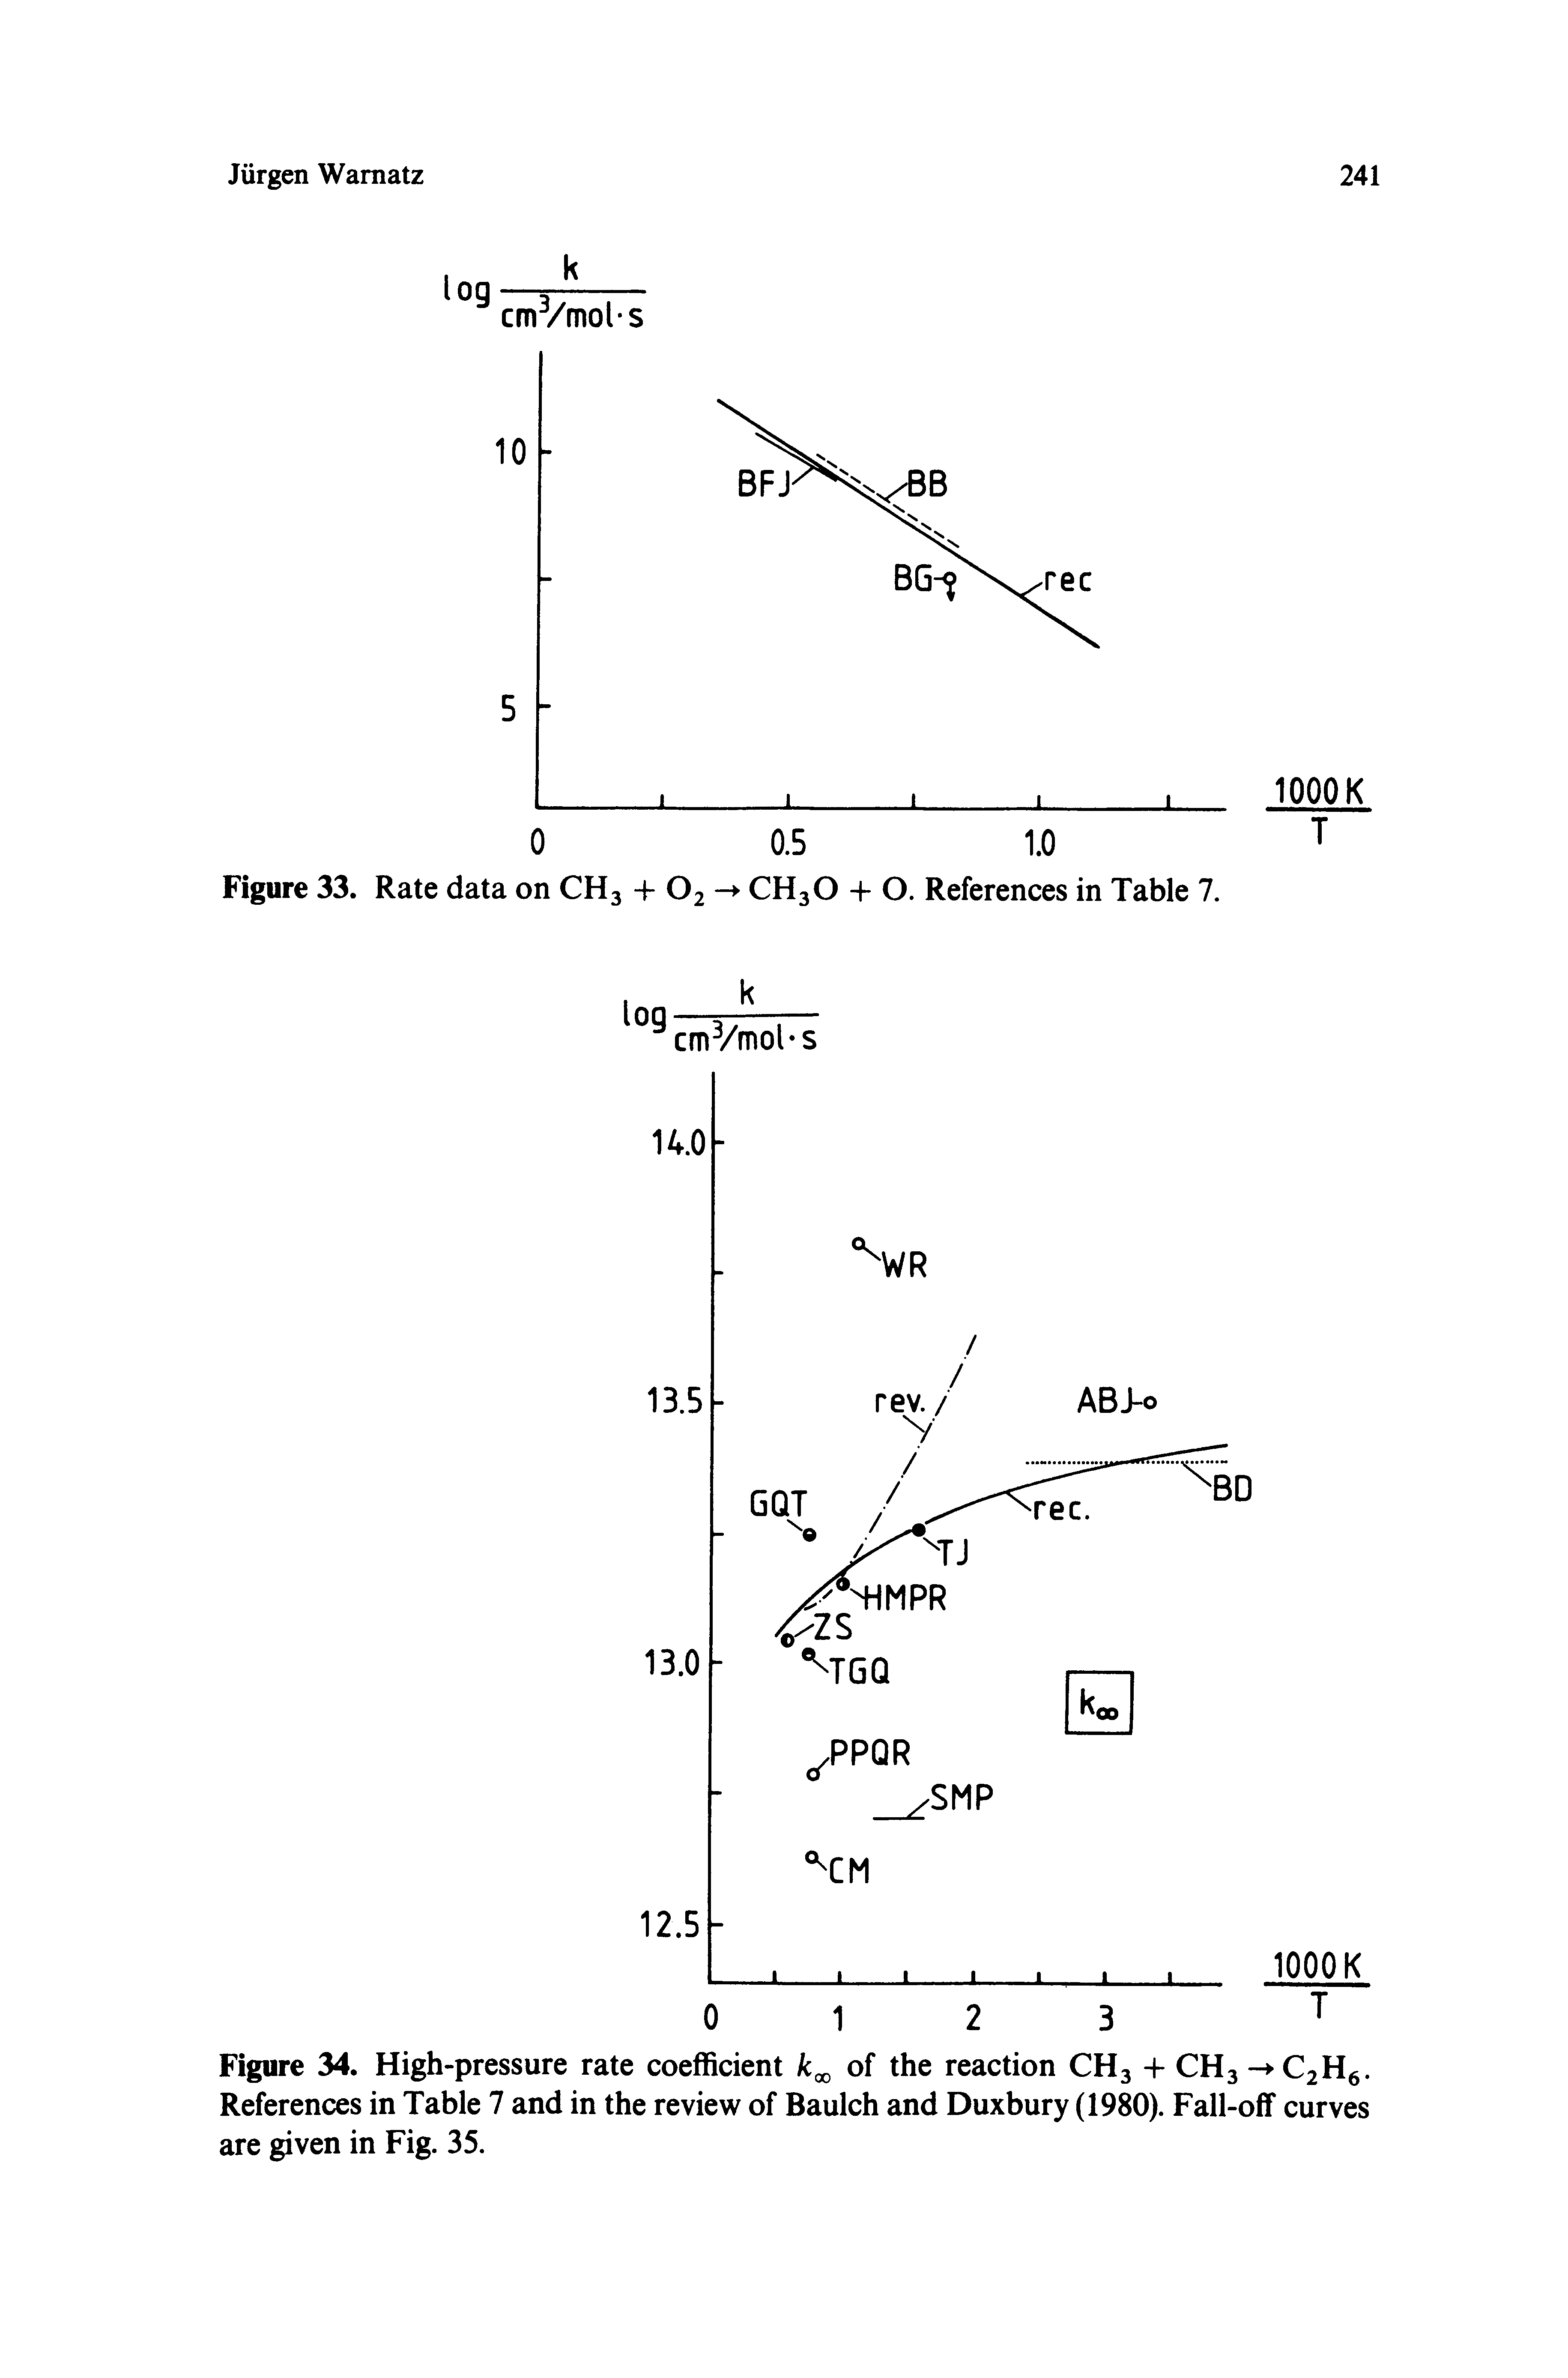 Figure 34. High-pressure rate coefficient of the reaction CHj -I- CHj - CjHg. References in Table 7 and in the review of Baulch and Duxbury (1980). Fall-off curves are given in Fig. 35.